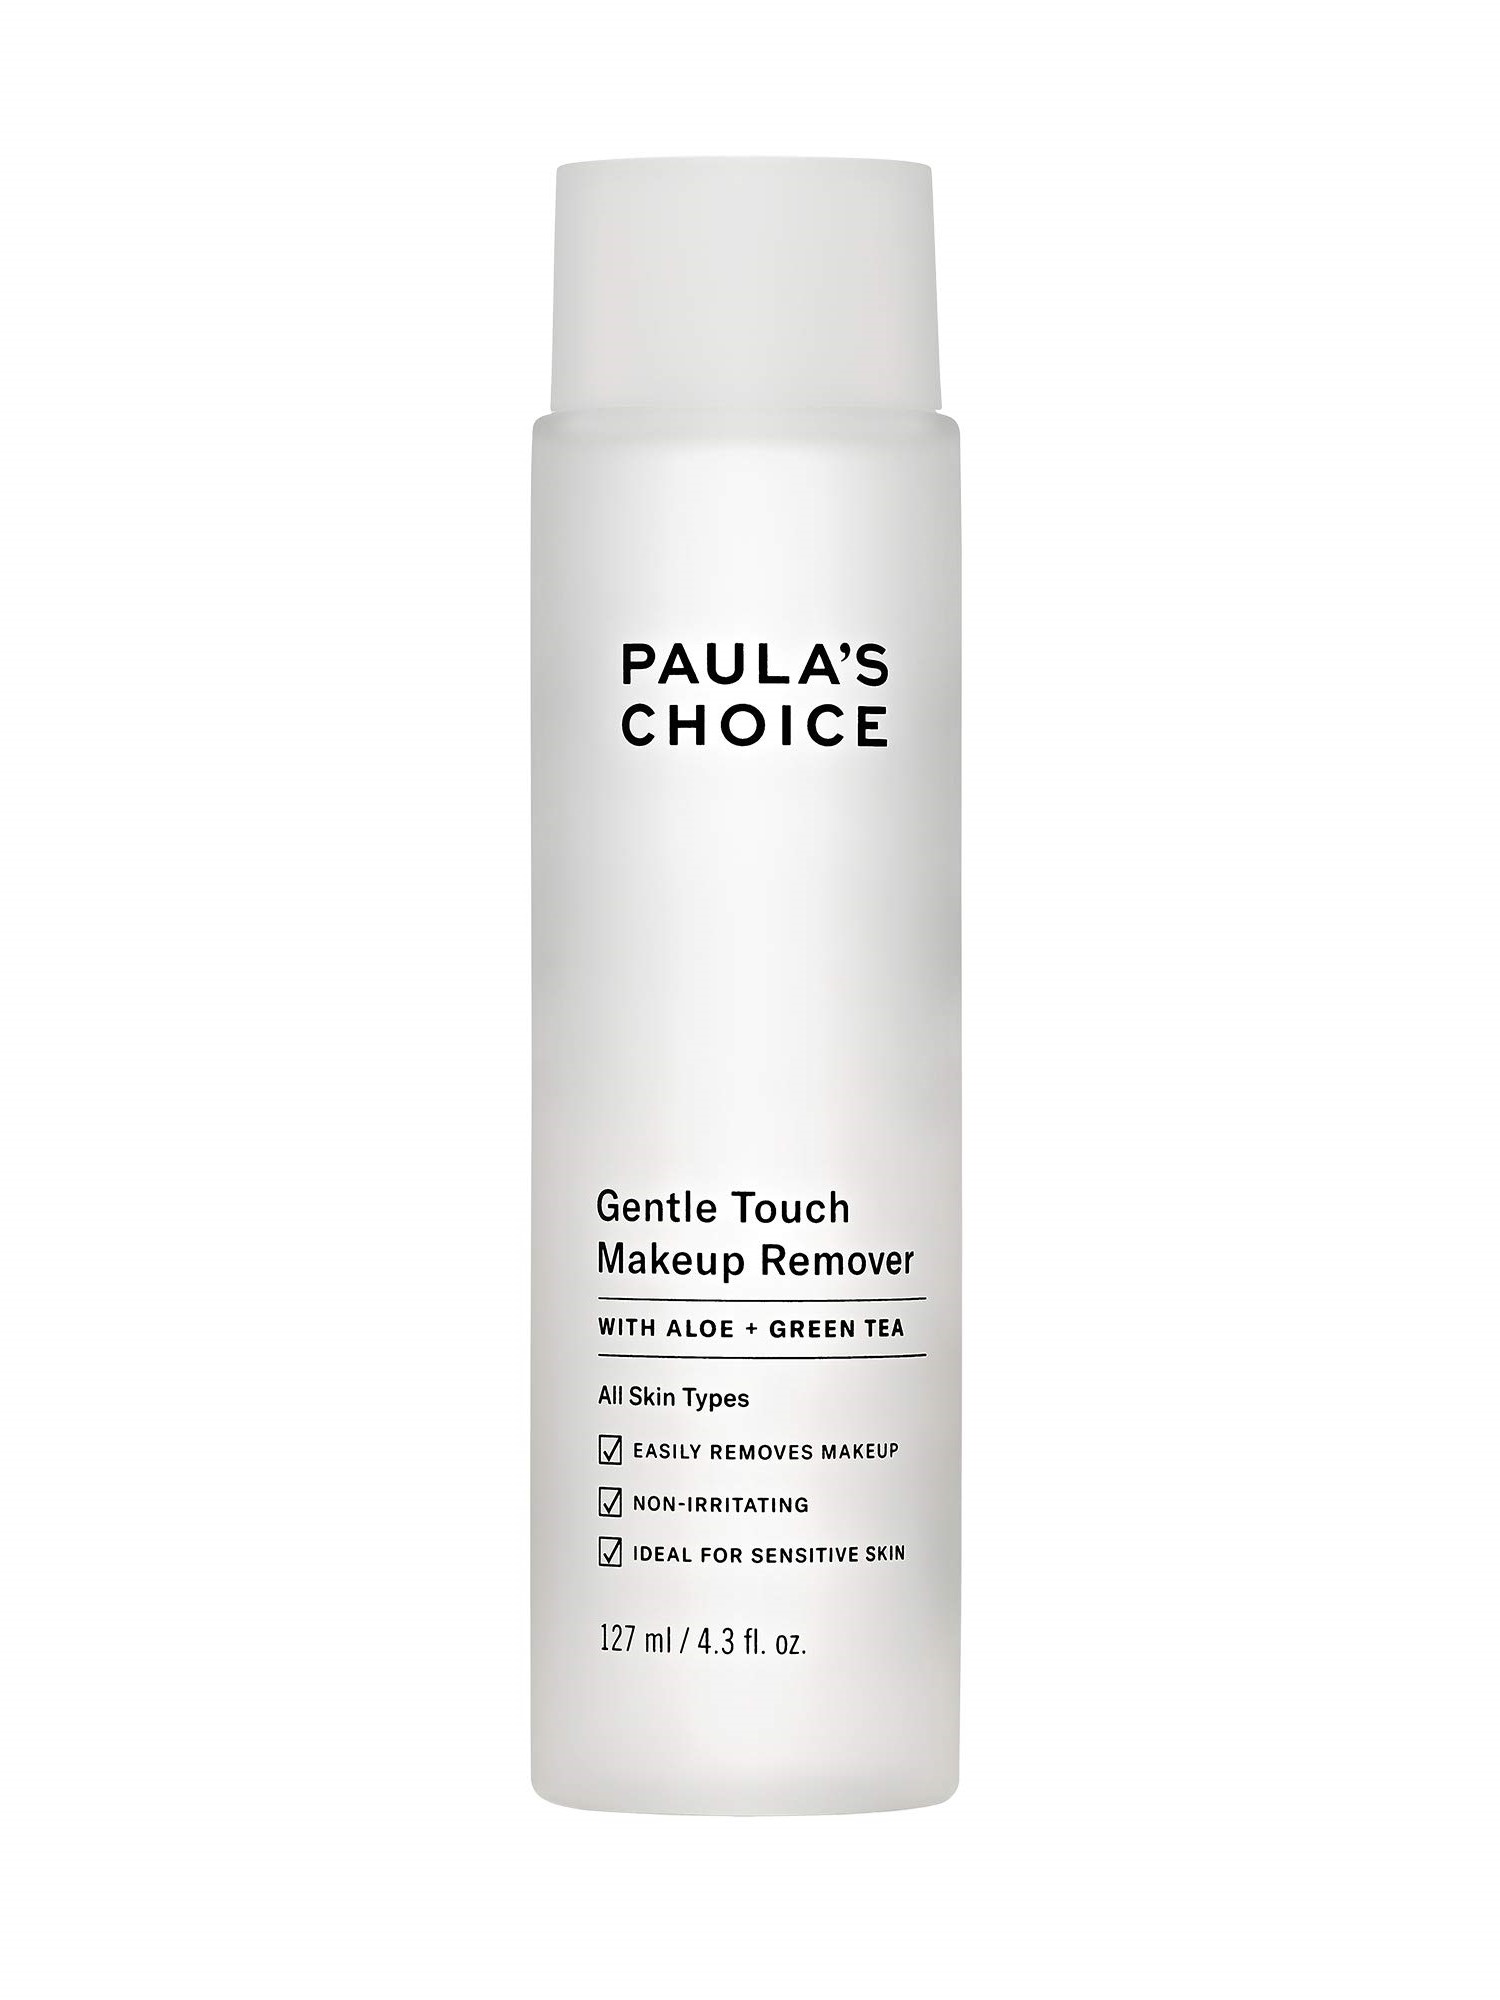 4. Paula's Choice Gentle Touch Makeup Remover